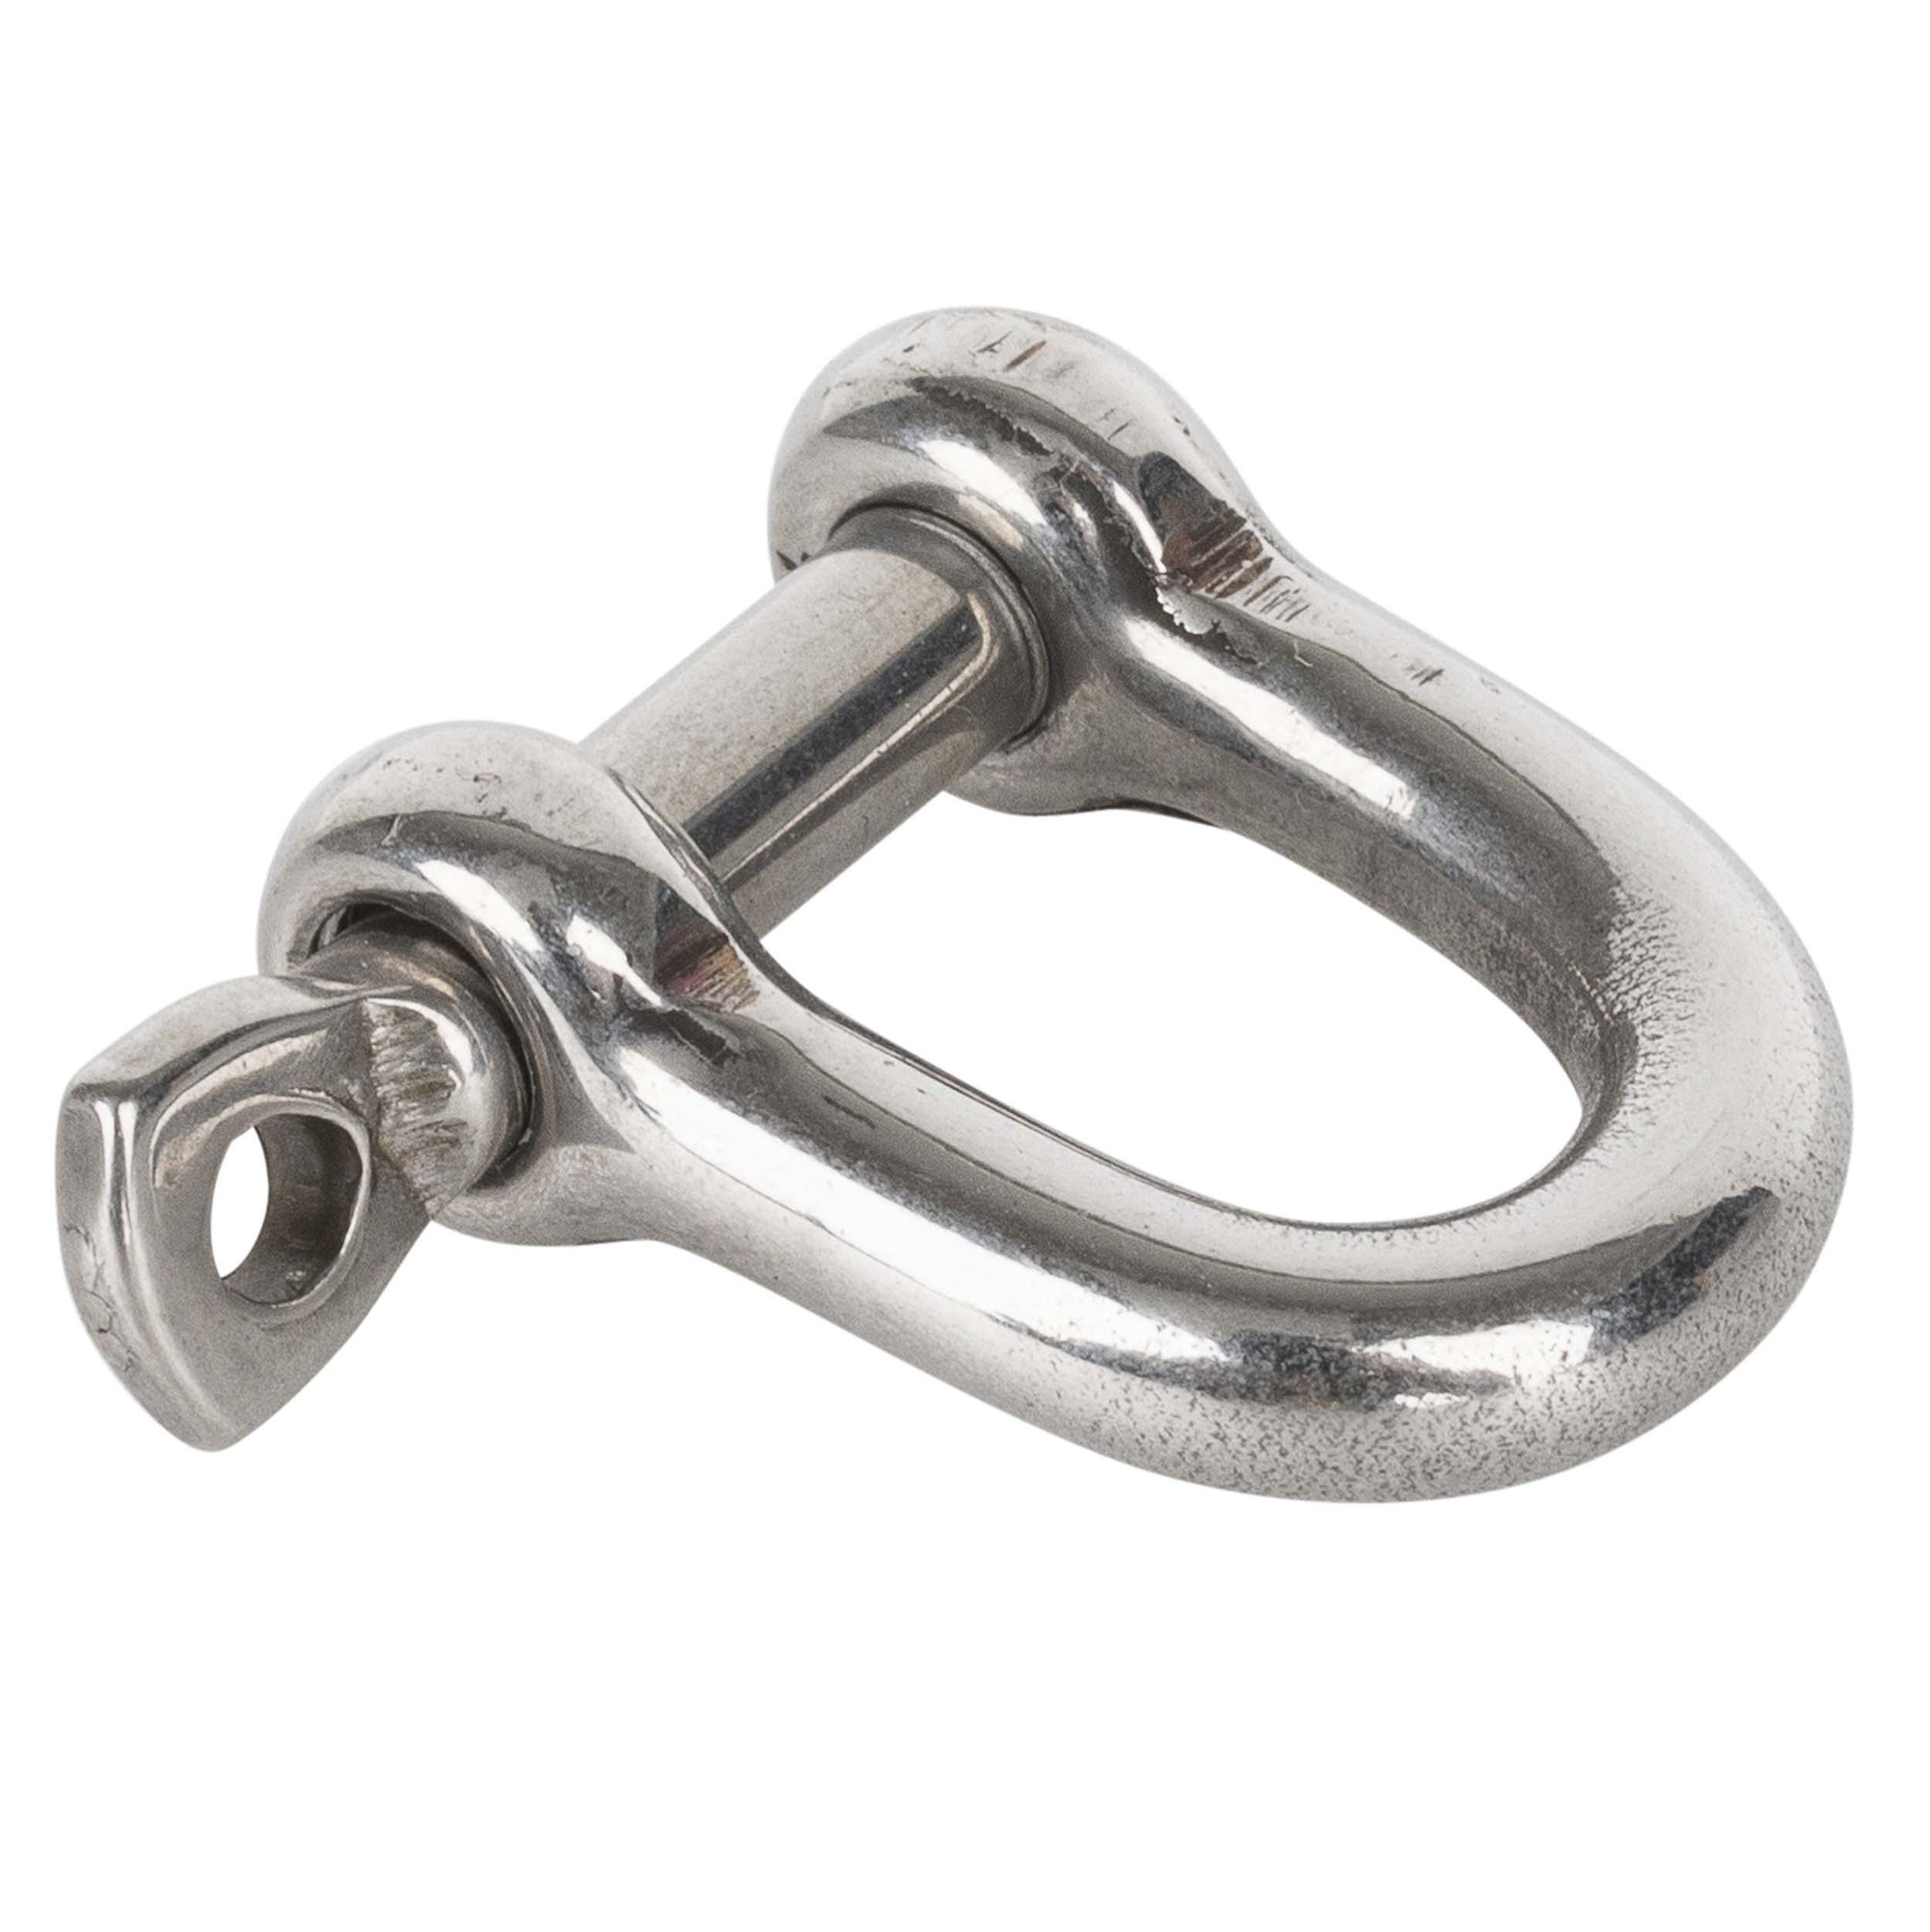 PLASTIMO 5mm stainless steel straight captive pin sailing shackle